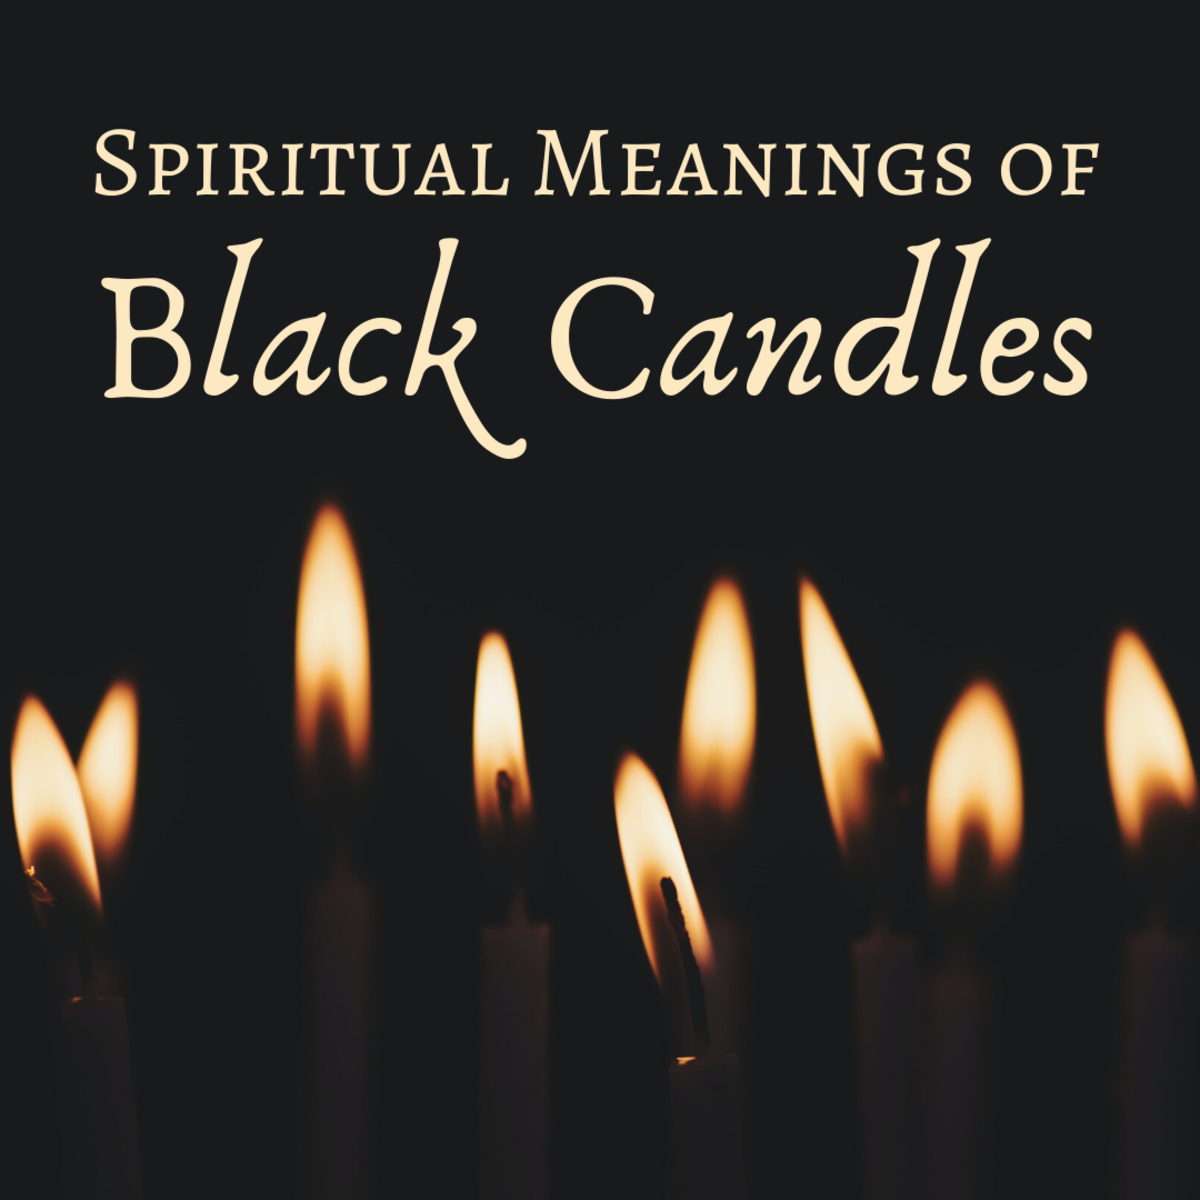 How to Use the Spiritual Power of Black Candles